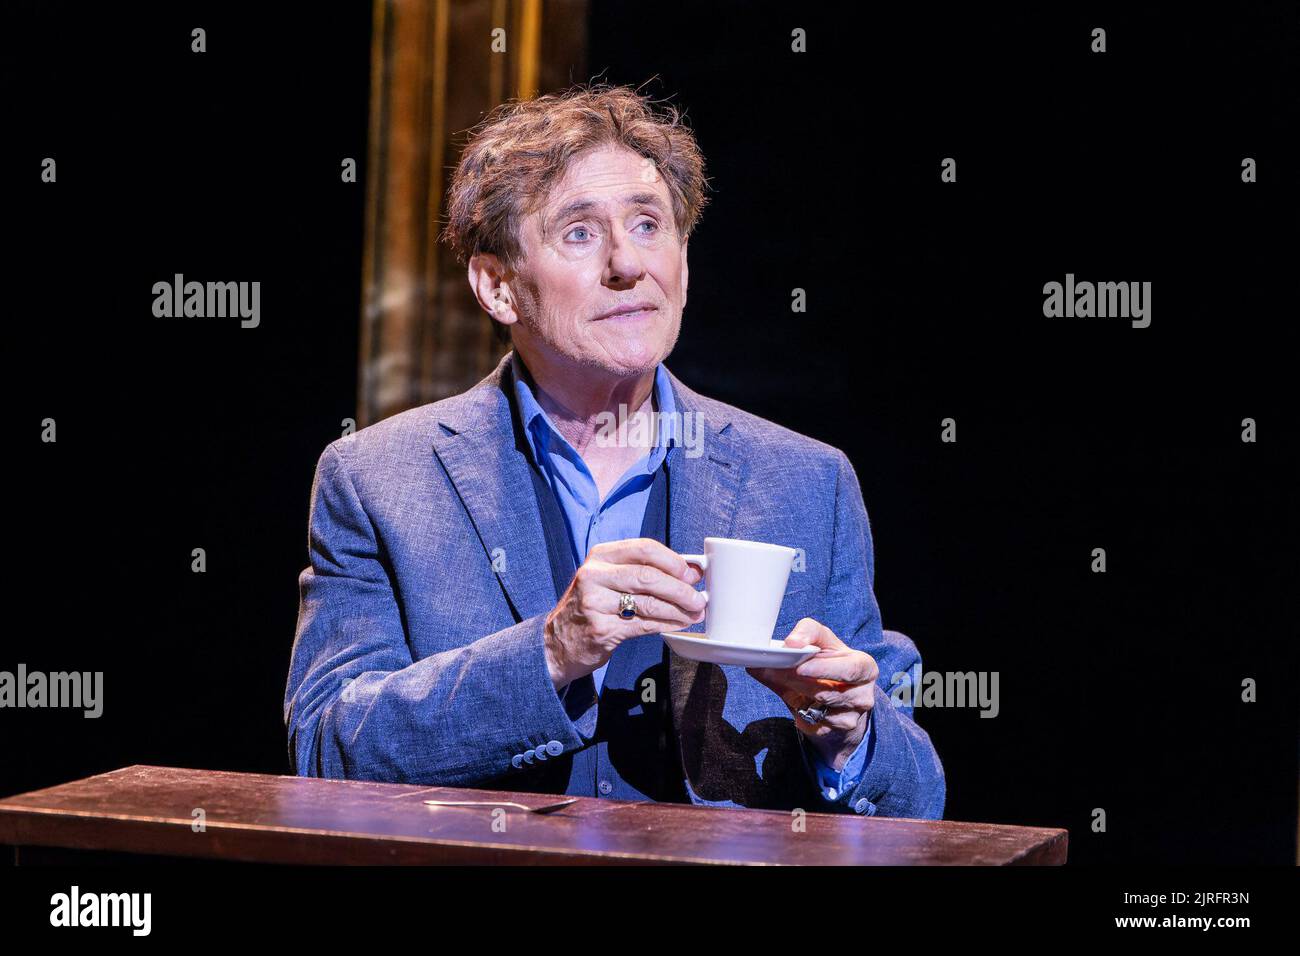 Edinburgh, United Kingdom. 24 August, 2022 Pictured: Adapted from his best-selling 2020 memoir of the same name, Walking with Ghosts follows Gabriel Byrne from his childhood in Ireland to his film career in Hollywood. Credit: Rich Dyson/Alamy Live News Stock Photo